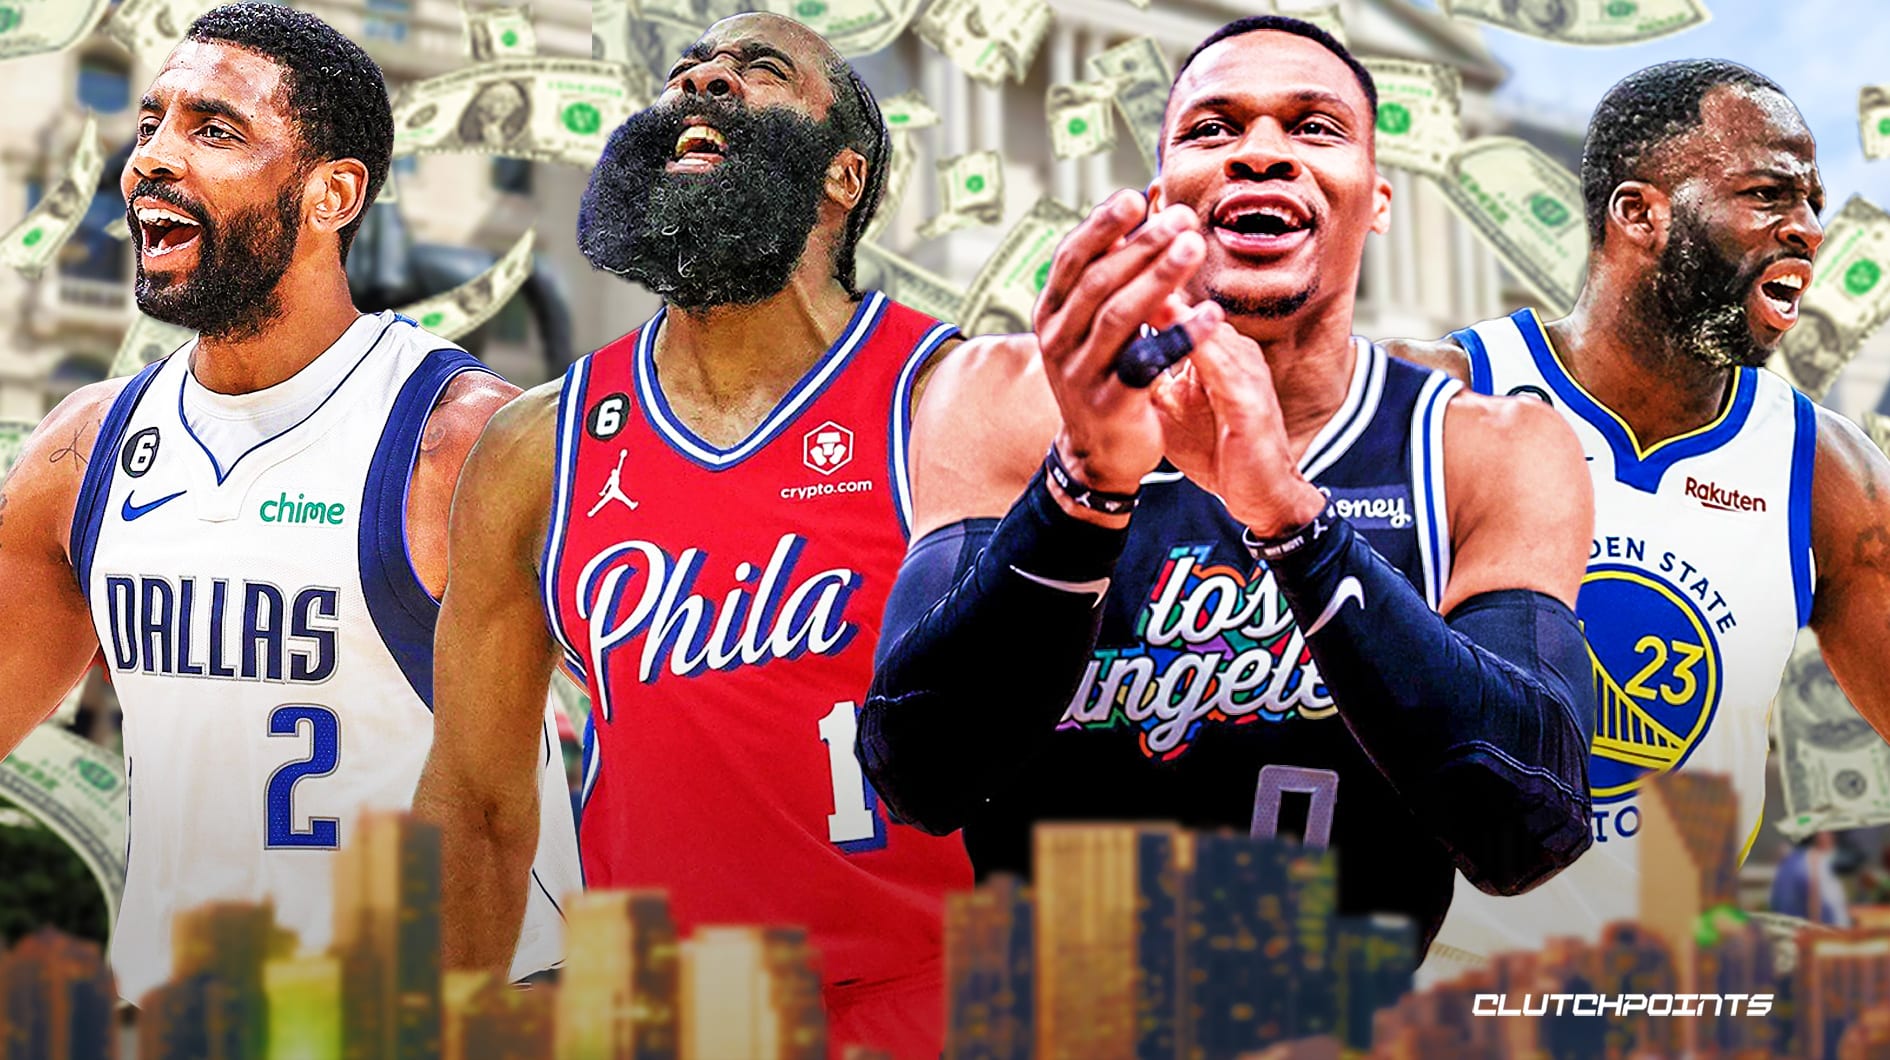 2023 NBA free agents James Harden, Kyrie Irving lead class